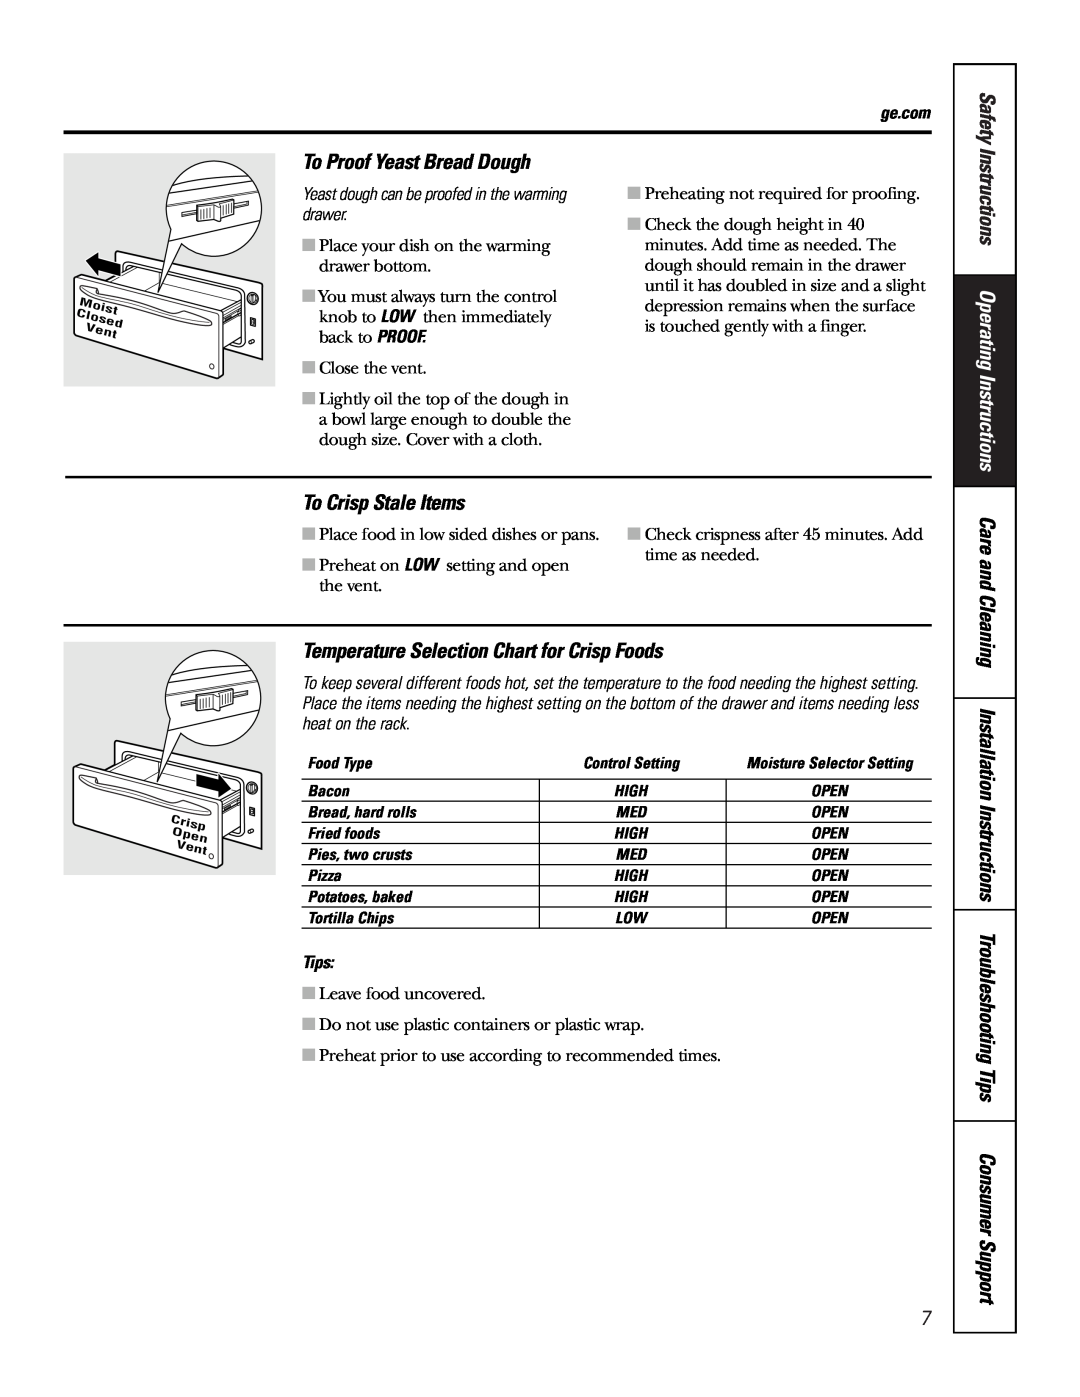 GE JKD915 To Proof Yeast Bread Dough, To Crisp Stale Items, Temperature Selection Chart for Crisp Foods, Safety, Tips 